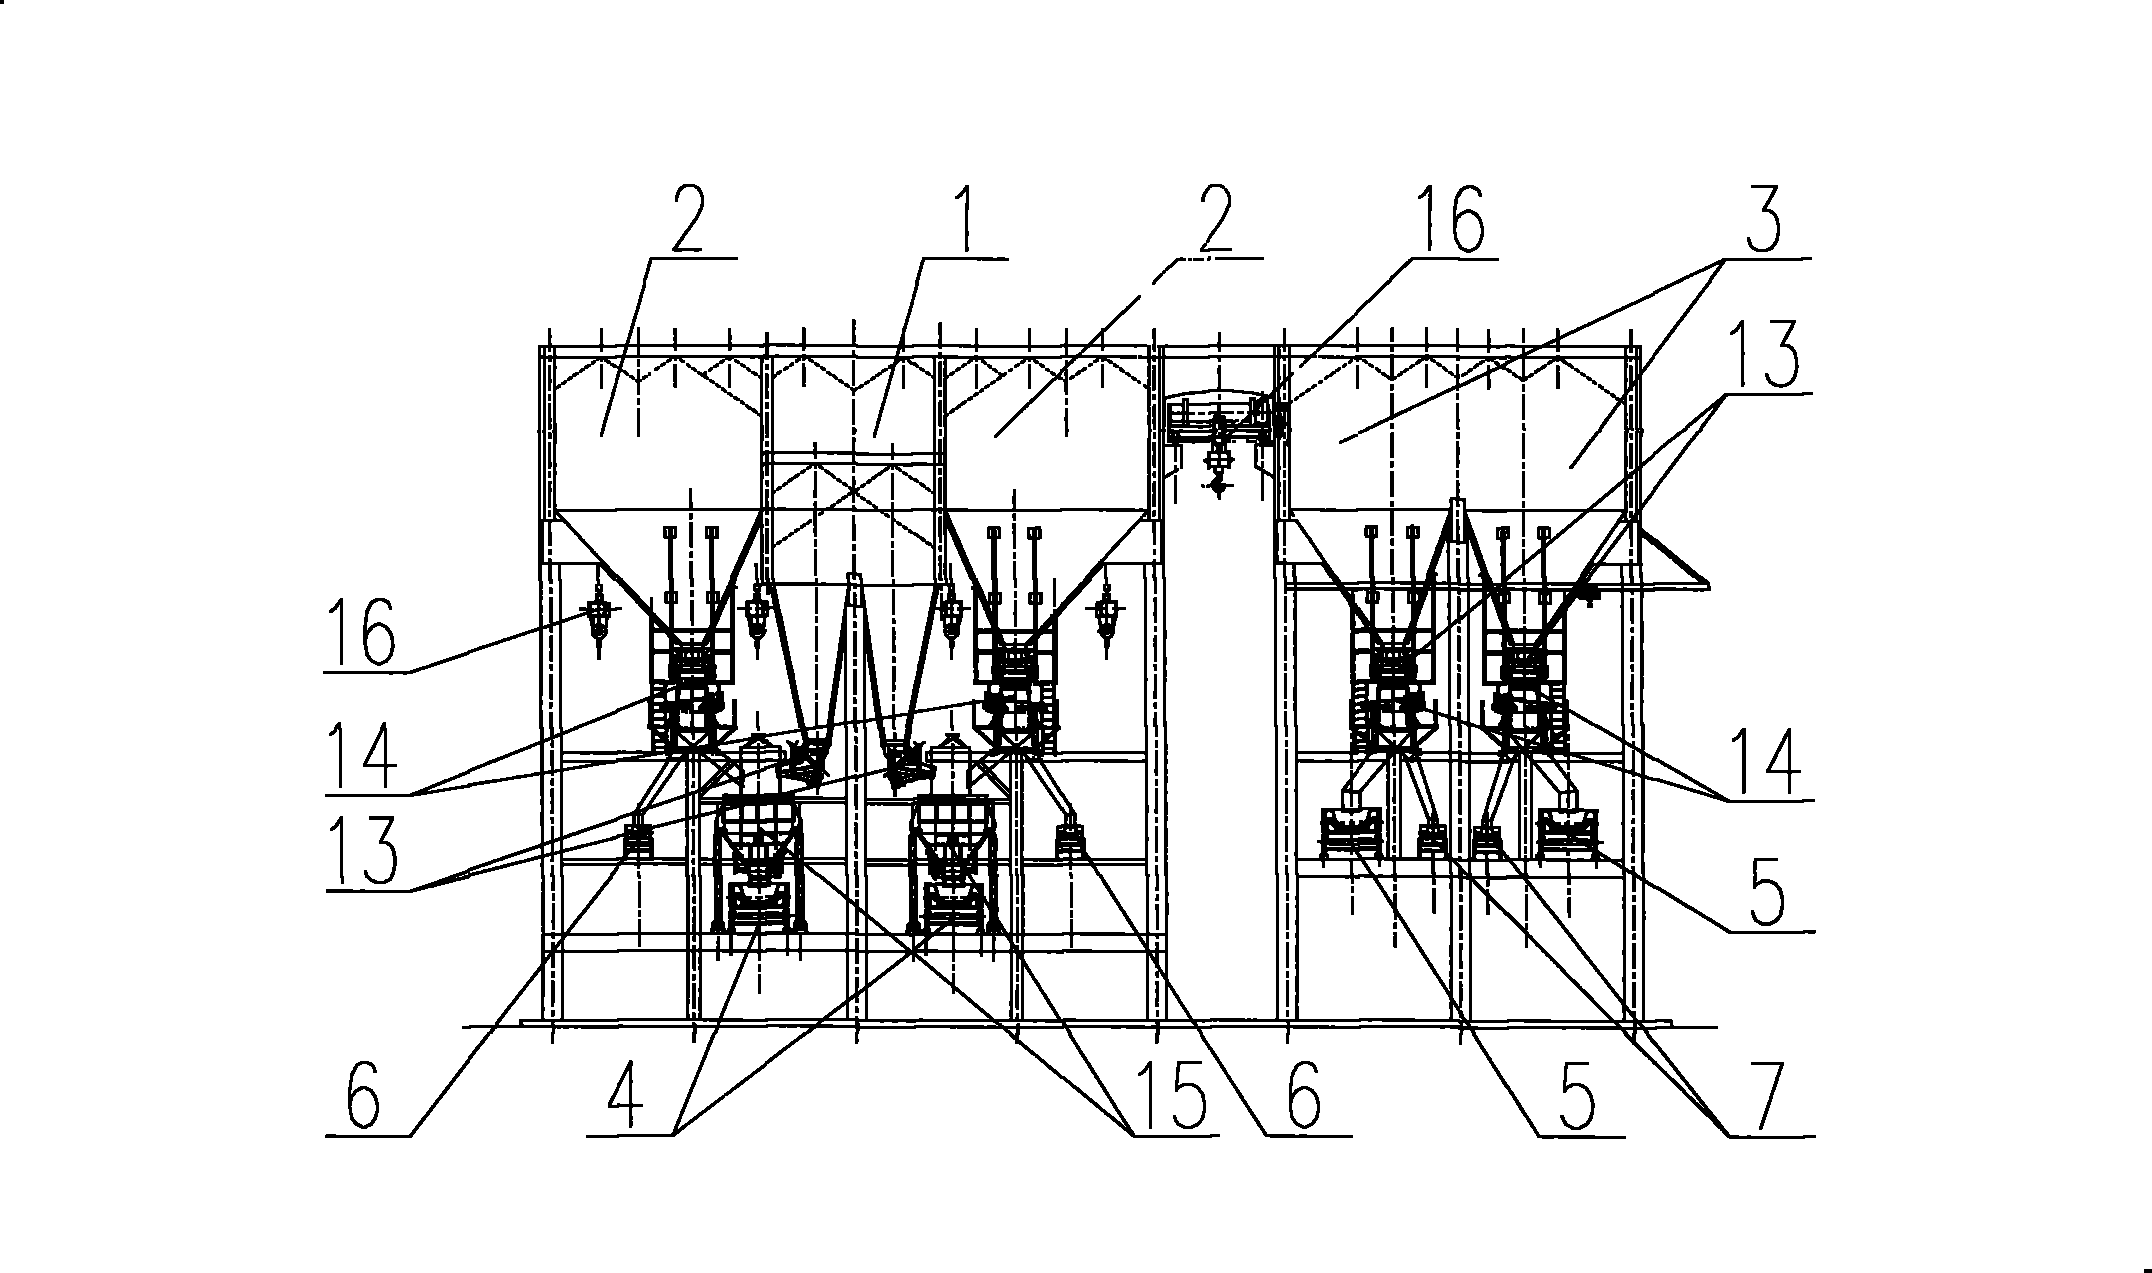 Combination technique arrangement of two coke and ore tank systems